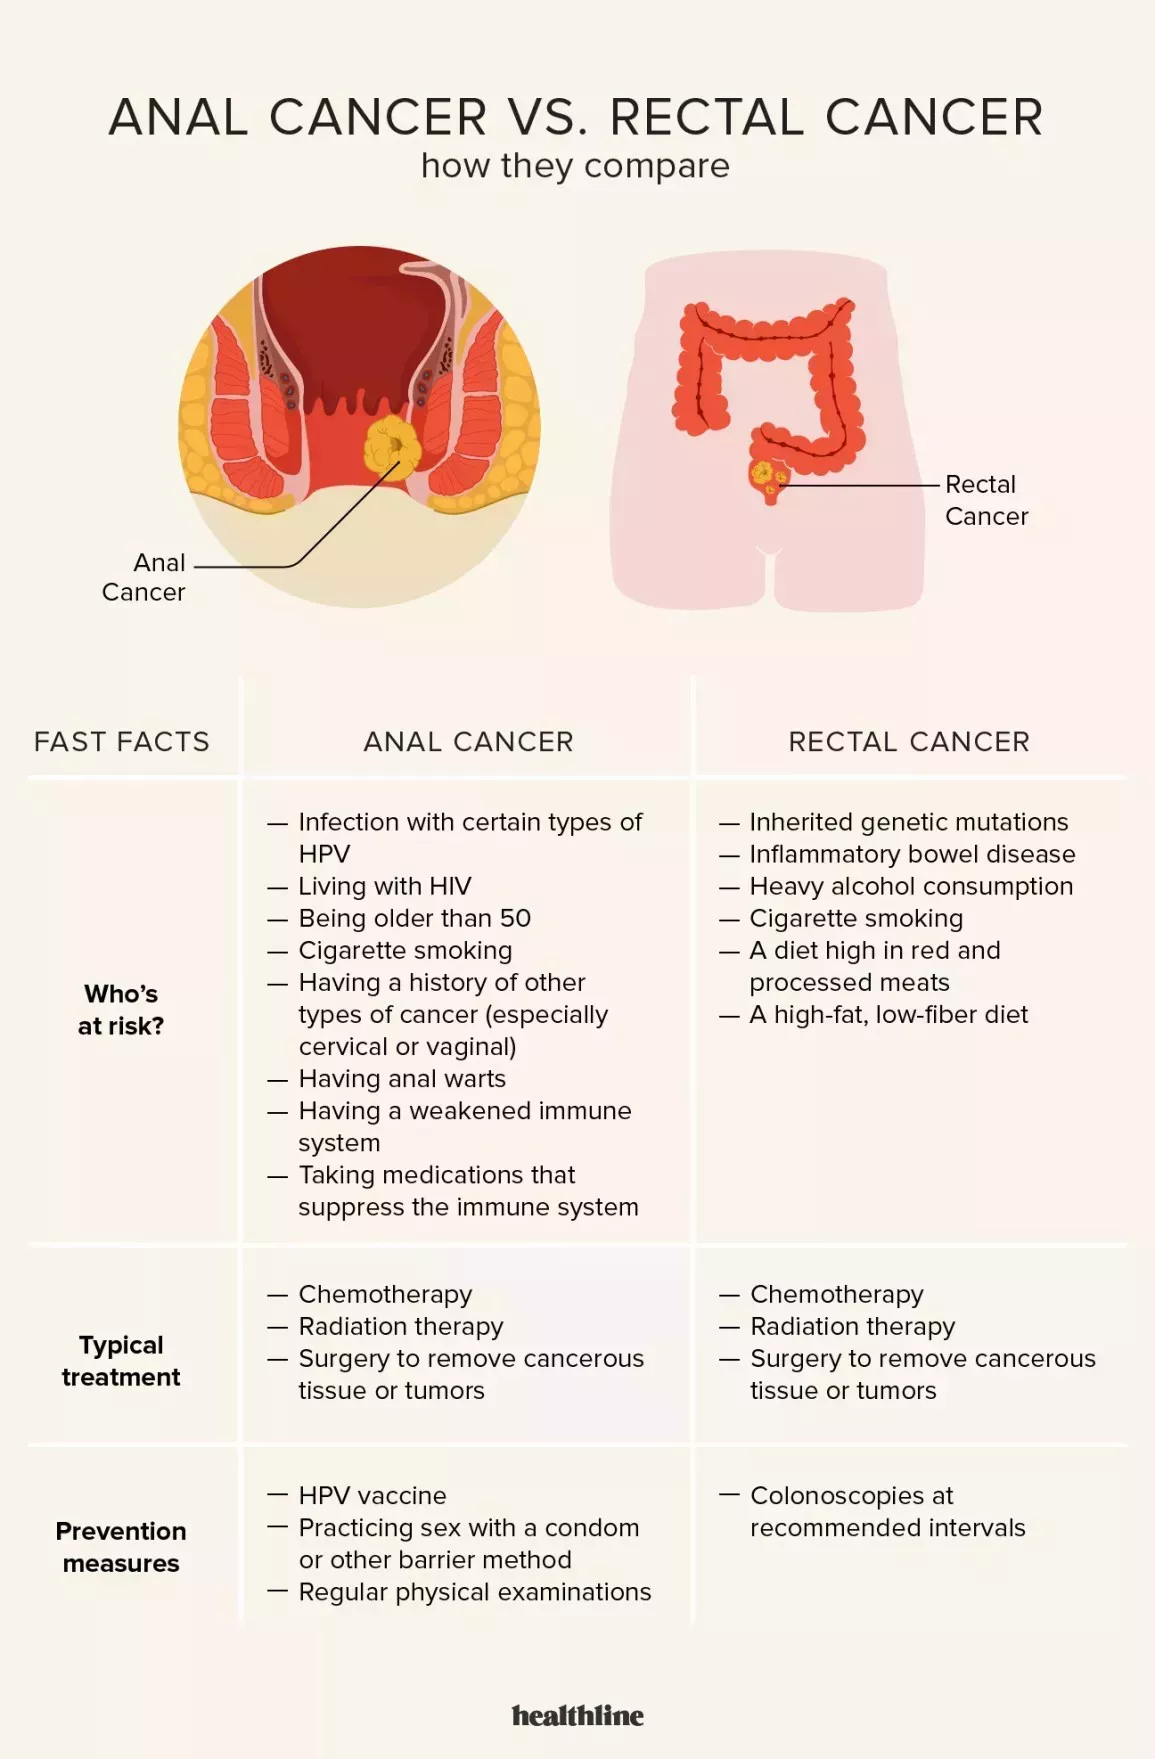 Anal cancer vs. rectal cancer comparison chart